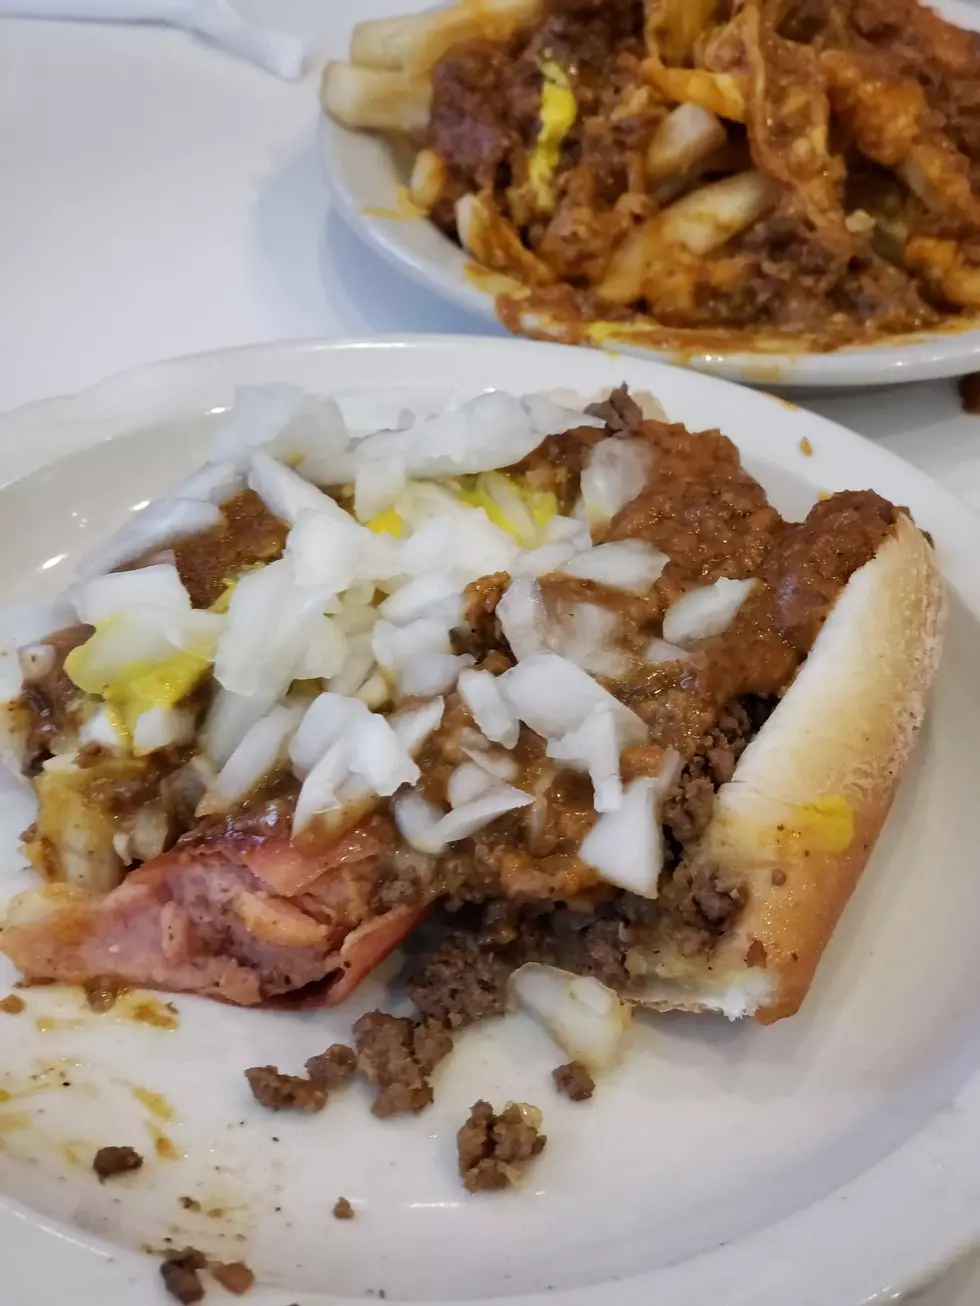 Craving A Coney? Where Are You Going in Lansing/East Lansing?